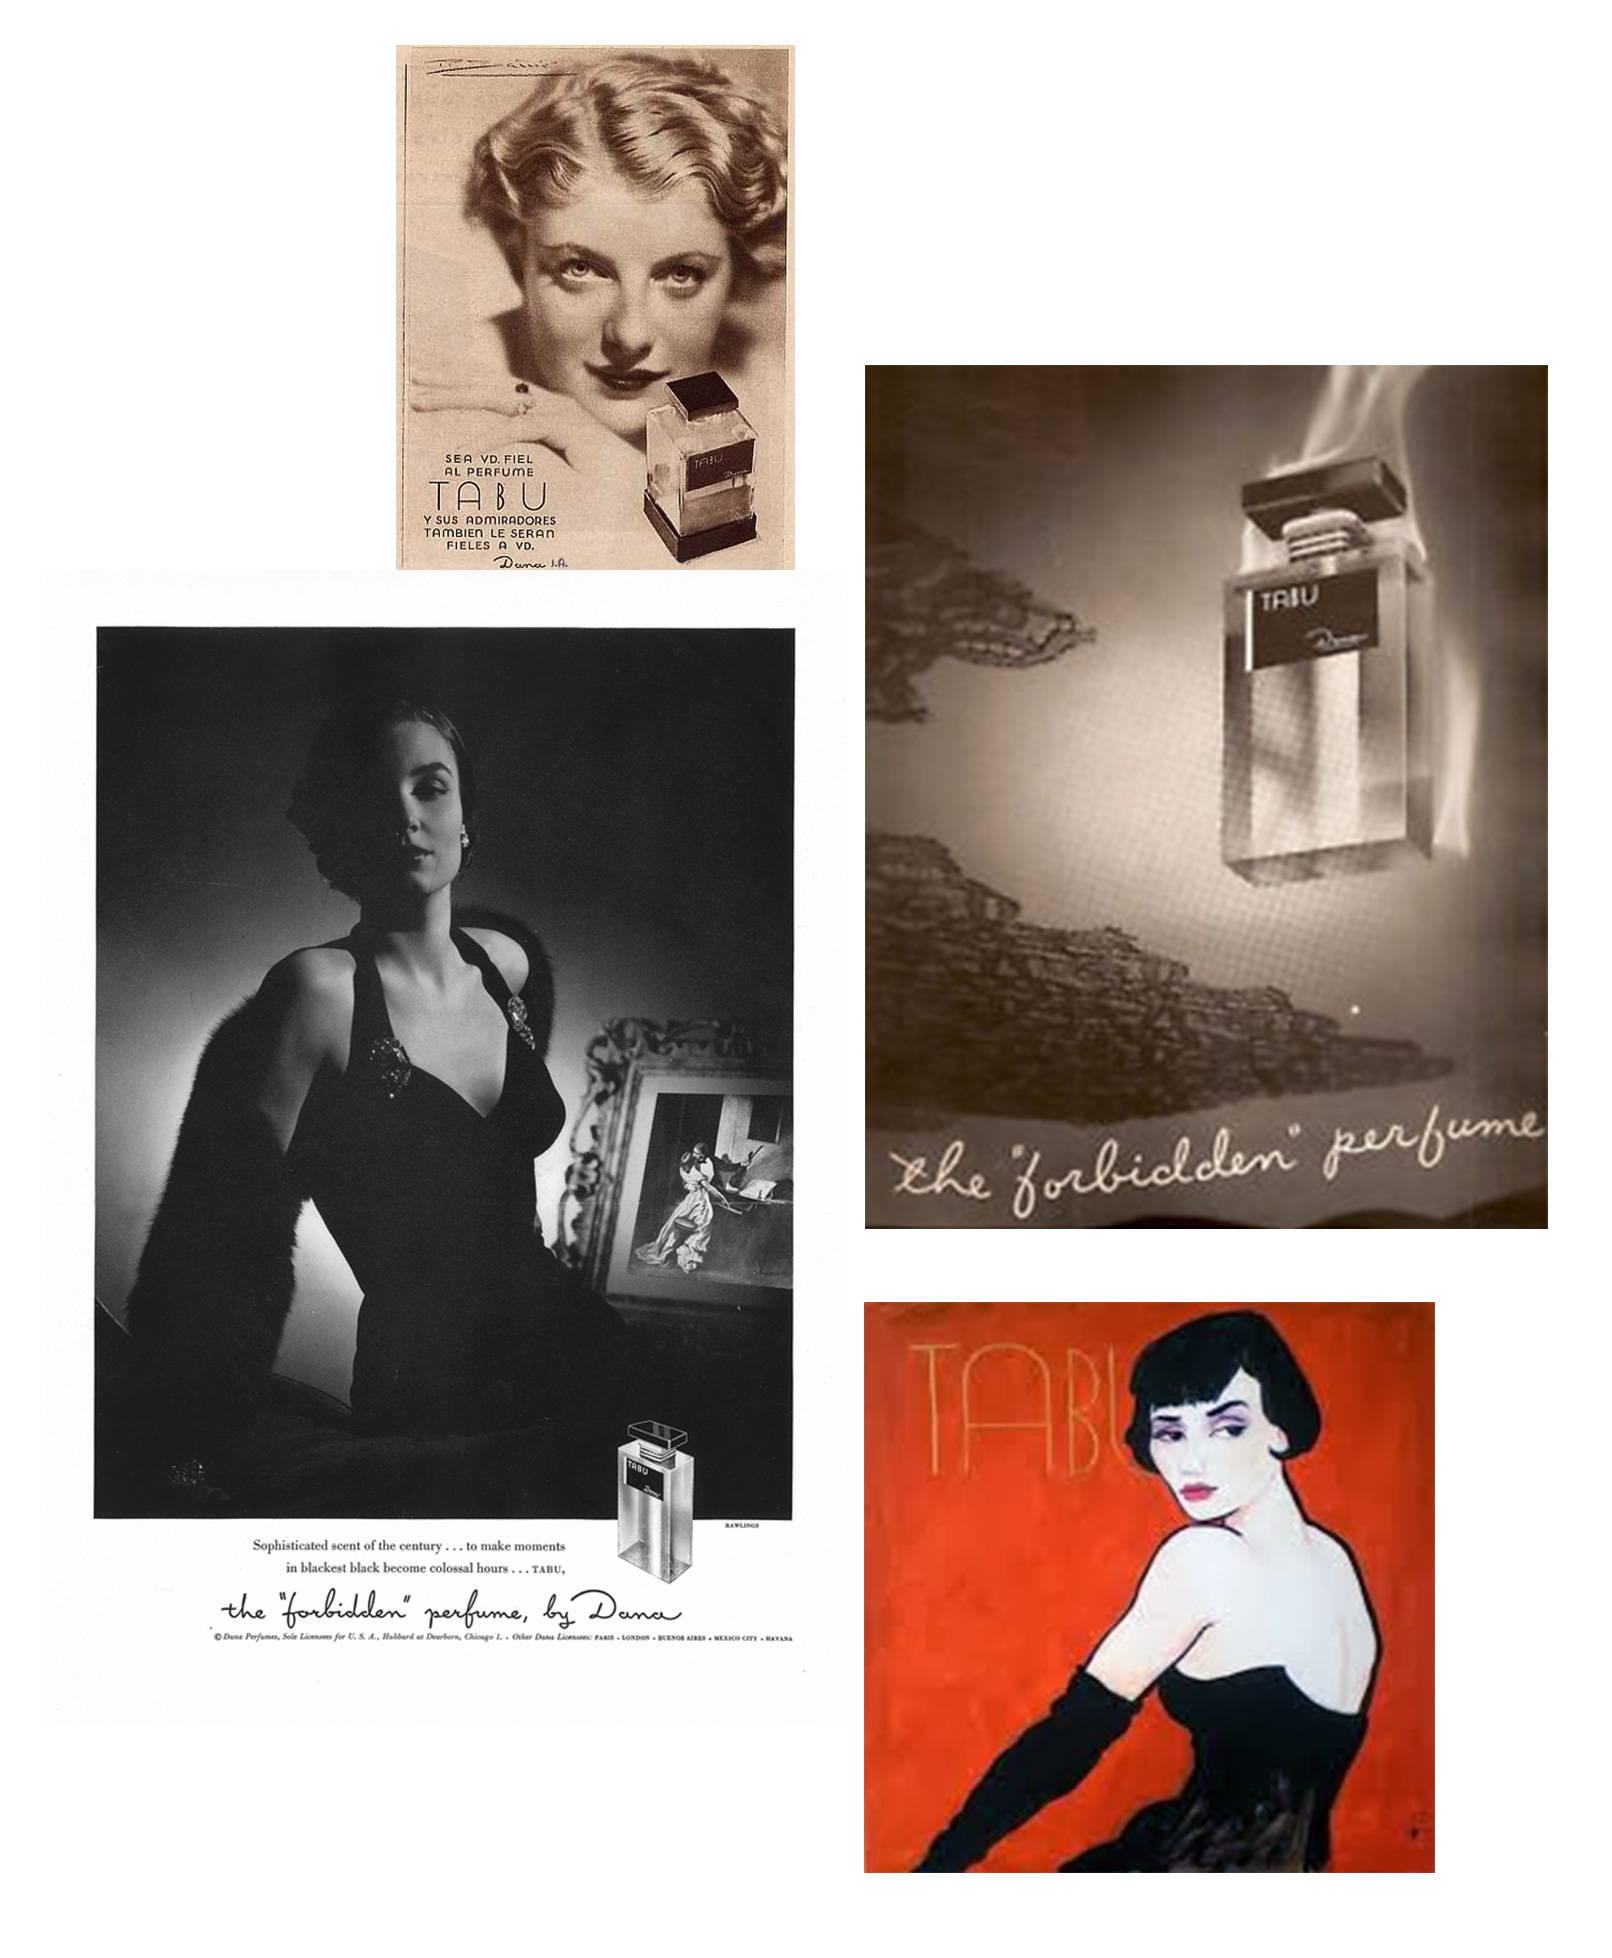 Various Tabu ads from the 1930s, 1940s and 1950s